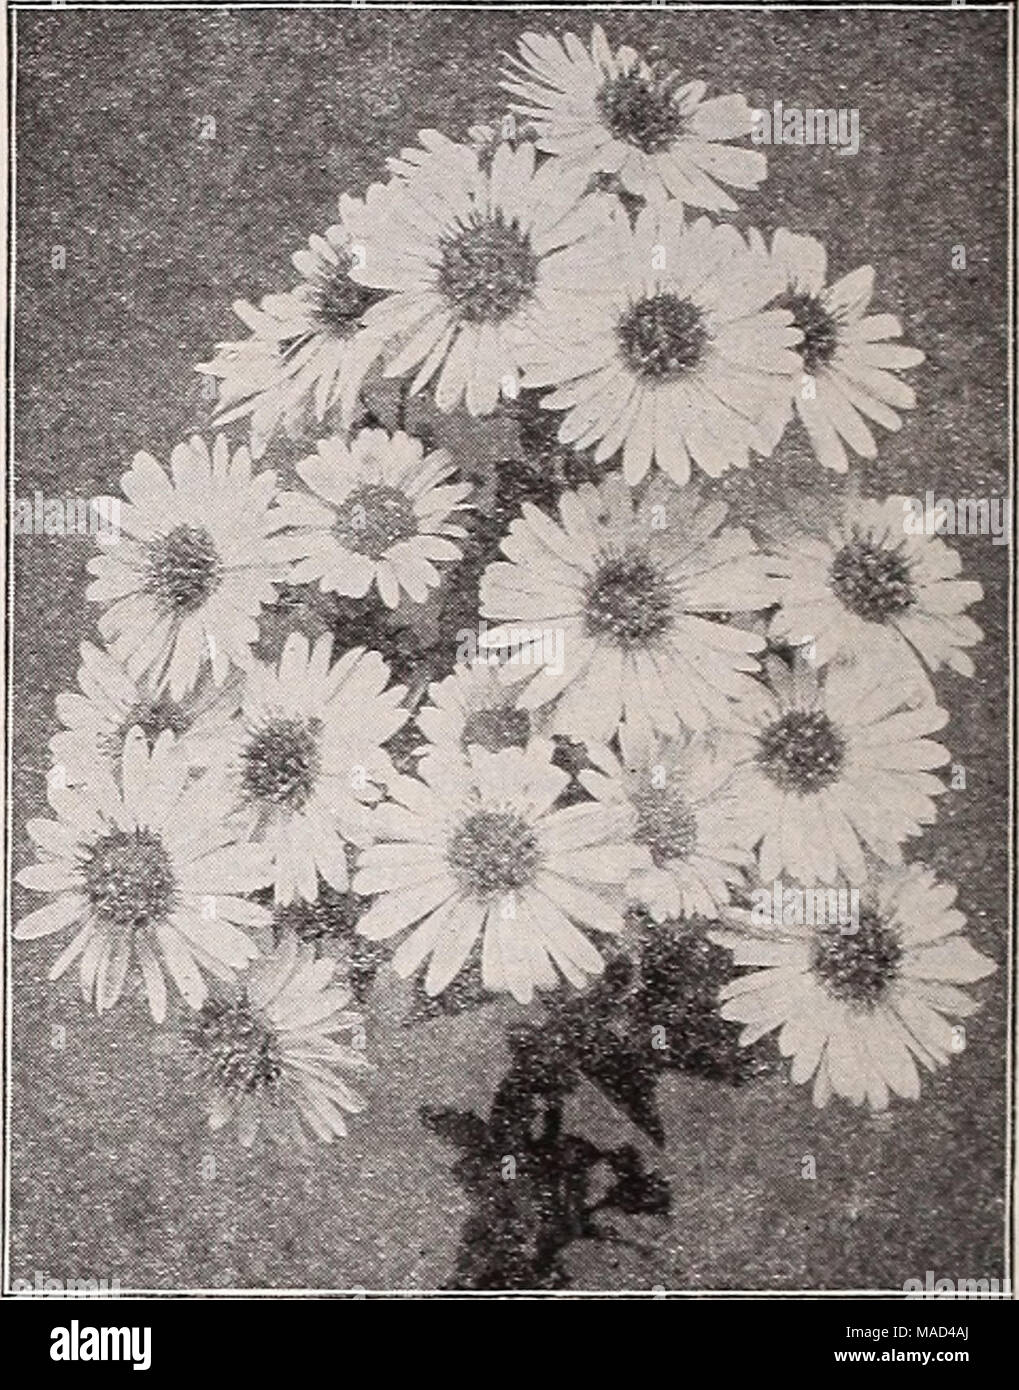 . Dreer's wholesale catalog for florists and market gardeners : autumn 1941 edition . Fall Flowering Hardy Asters Fall-Flowering Hardy Asters Michaelmas Daisies, Starworts well- Mt. Everest. A wonderful white Aster. Tall, shaped, pointed pyramids. September, 3-4 feet. Novi-belgi, Climax. Massive pyramidal spikes of large light lavender-blue flowers; very free. Sept.-Oct.; 5 feet. Either of the above: 12c each; $10.00 per 100. Dwarf Hybrid Border Asters Standard Sorts We highly recommend these Dwarf Hybrid Border Asters as they fill a distinct need for a dwarf, compact, free flowering plant tha Stock Photo